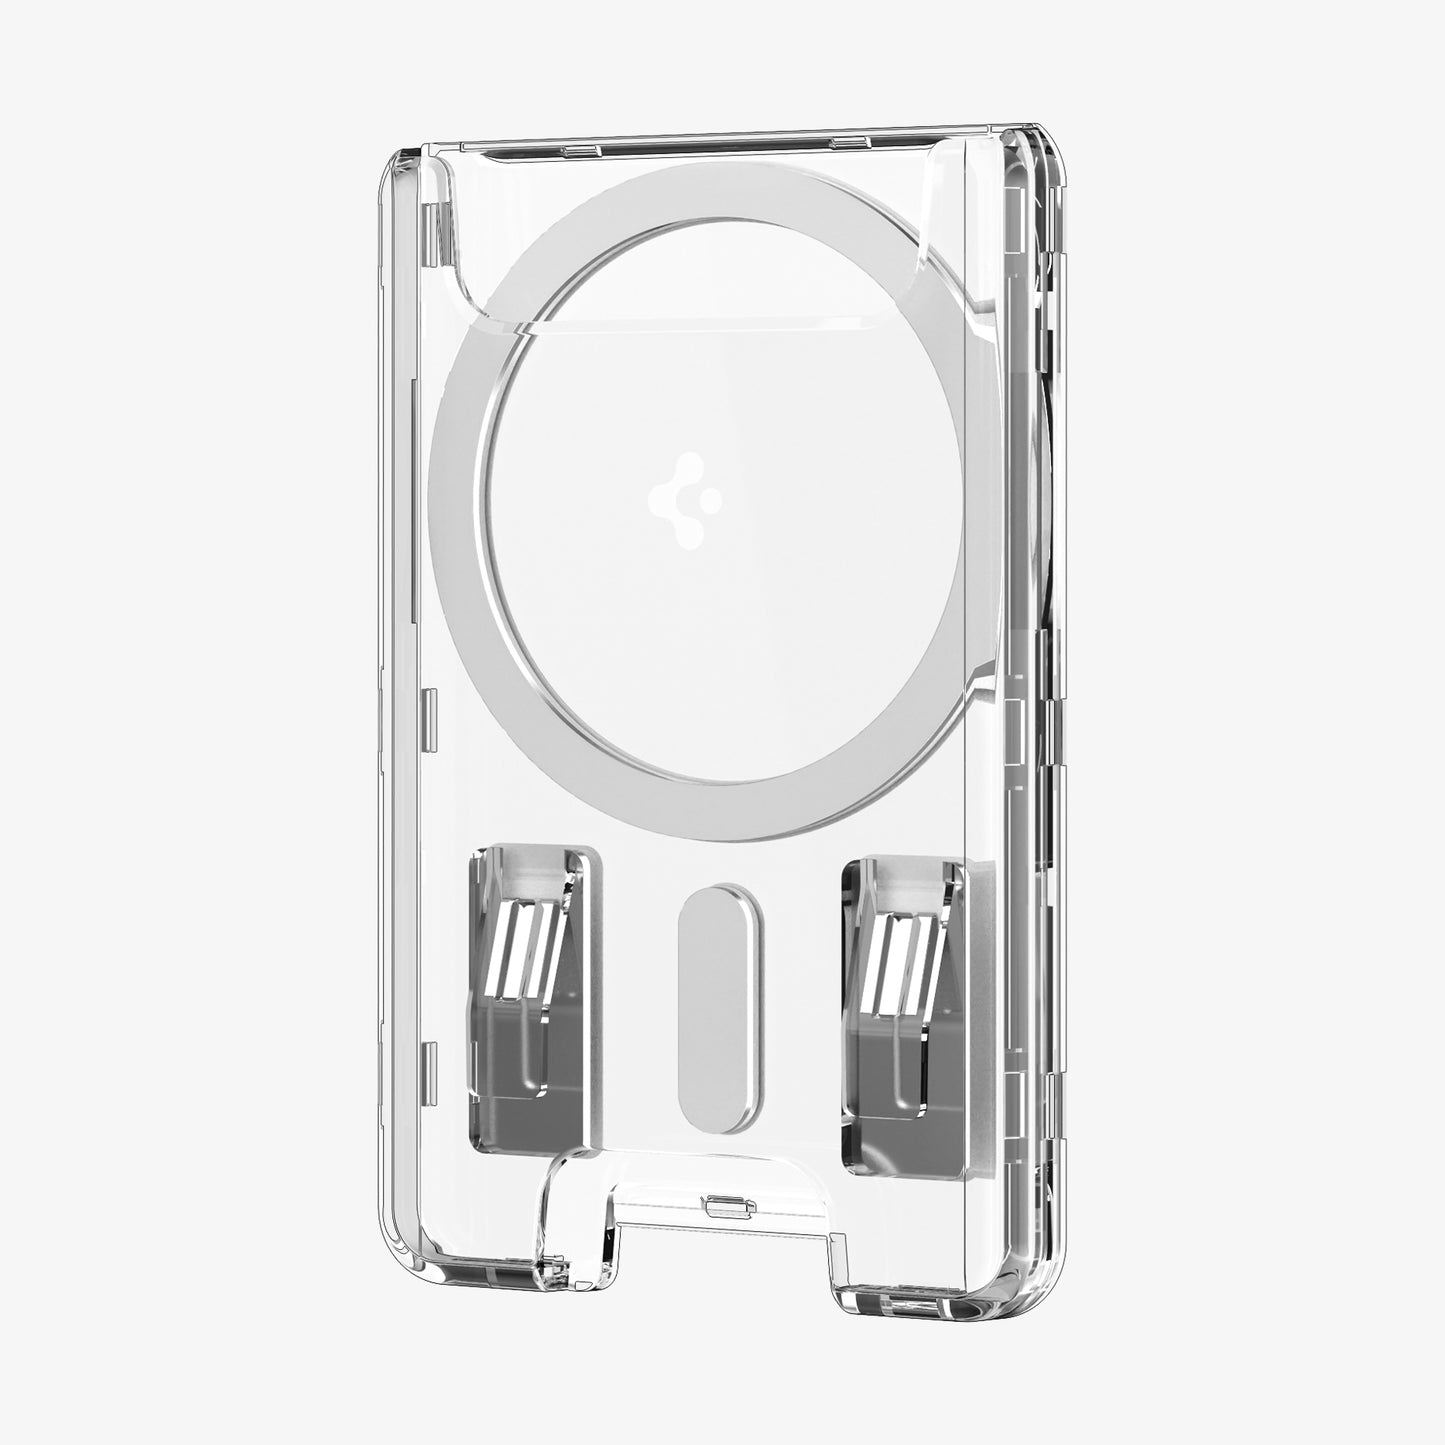 AFA07148 - Ultra Hybrid MagFit Wallet (MagFit) in Crystal Clear showing the front and partial side without cards inserted